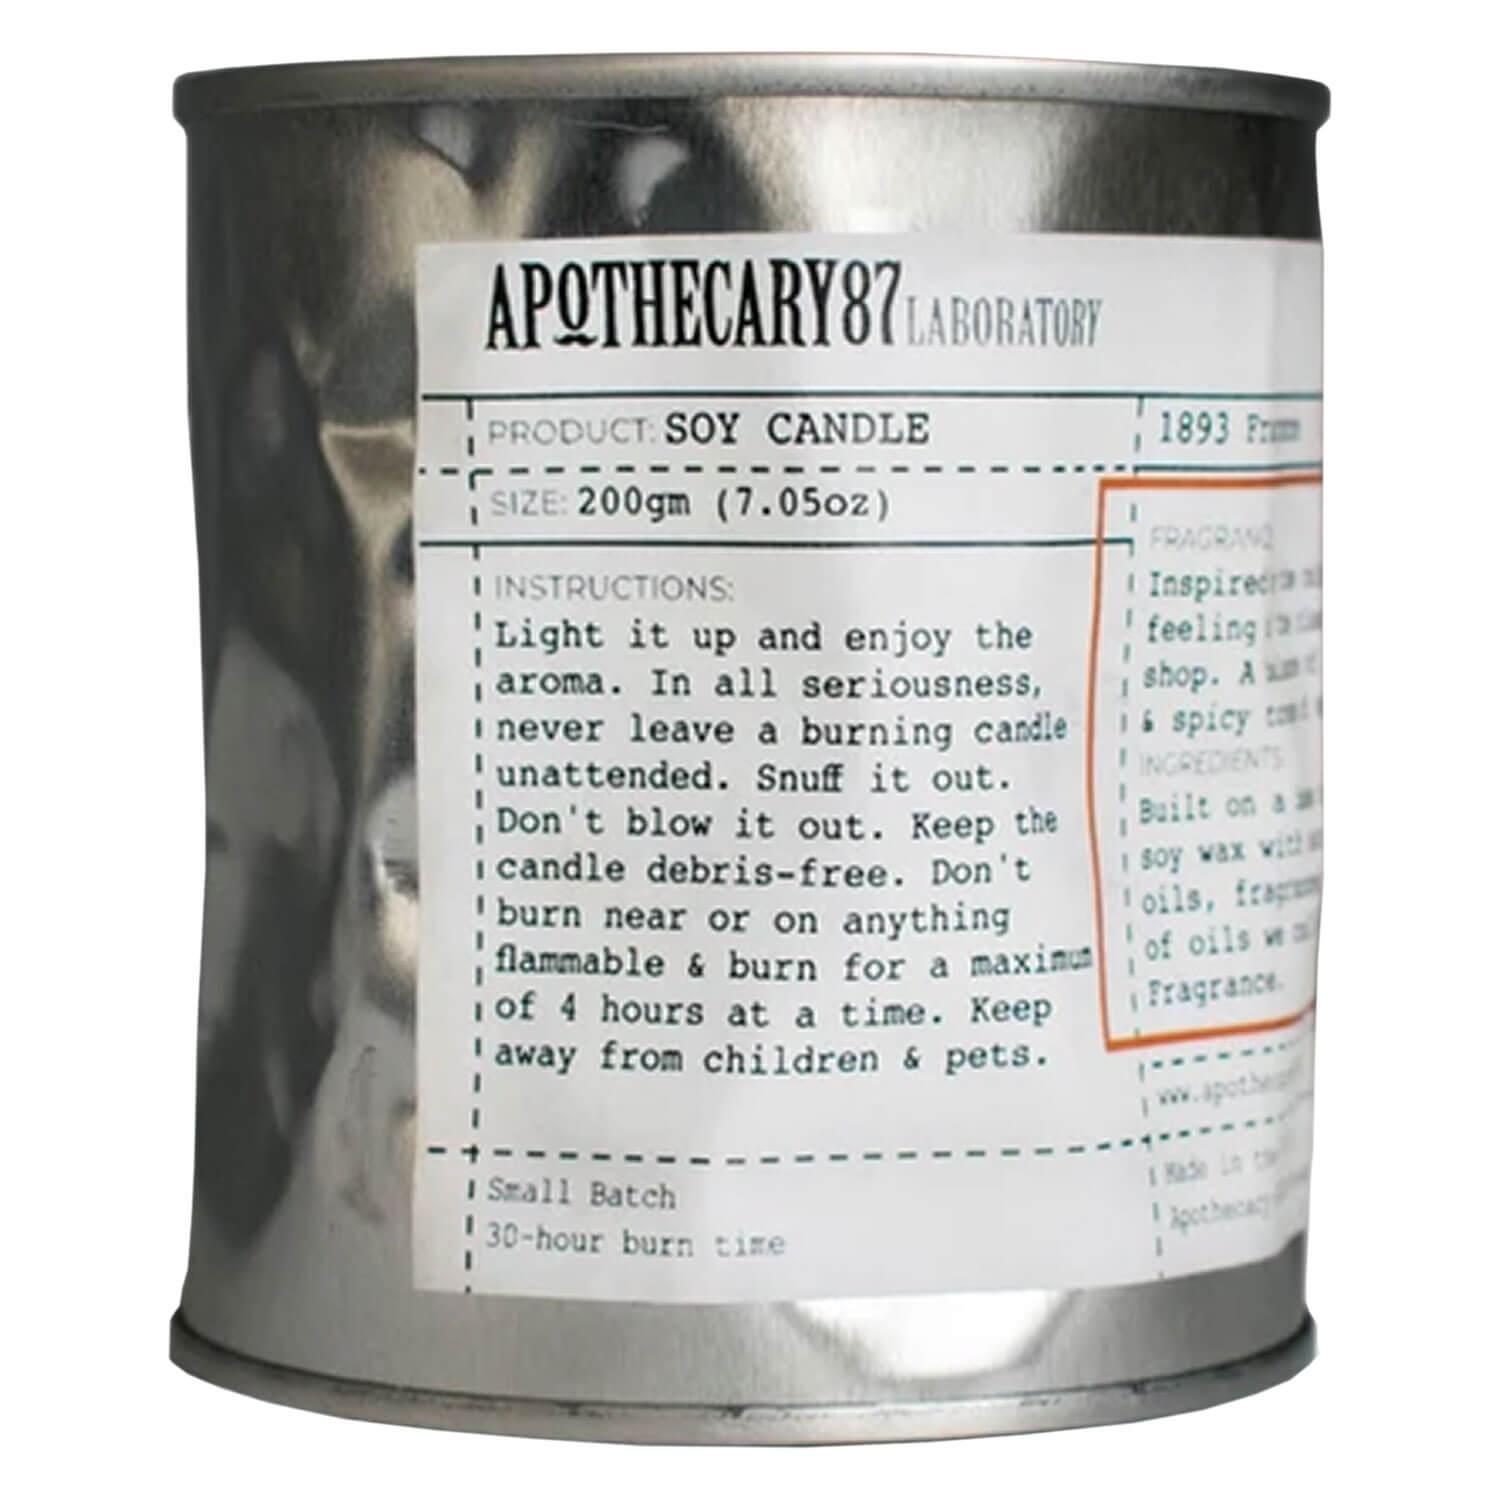 Apothecary87 Grooming - Soy Candle 1893 Fragrance